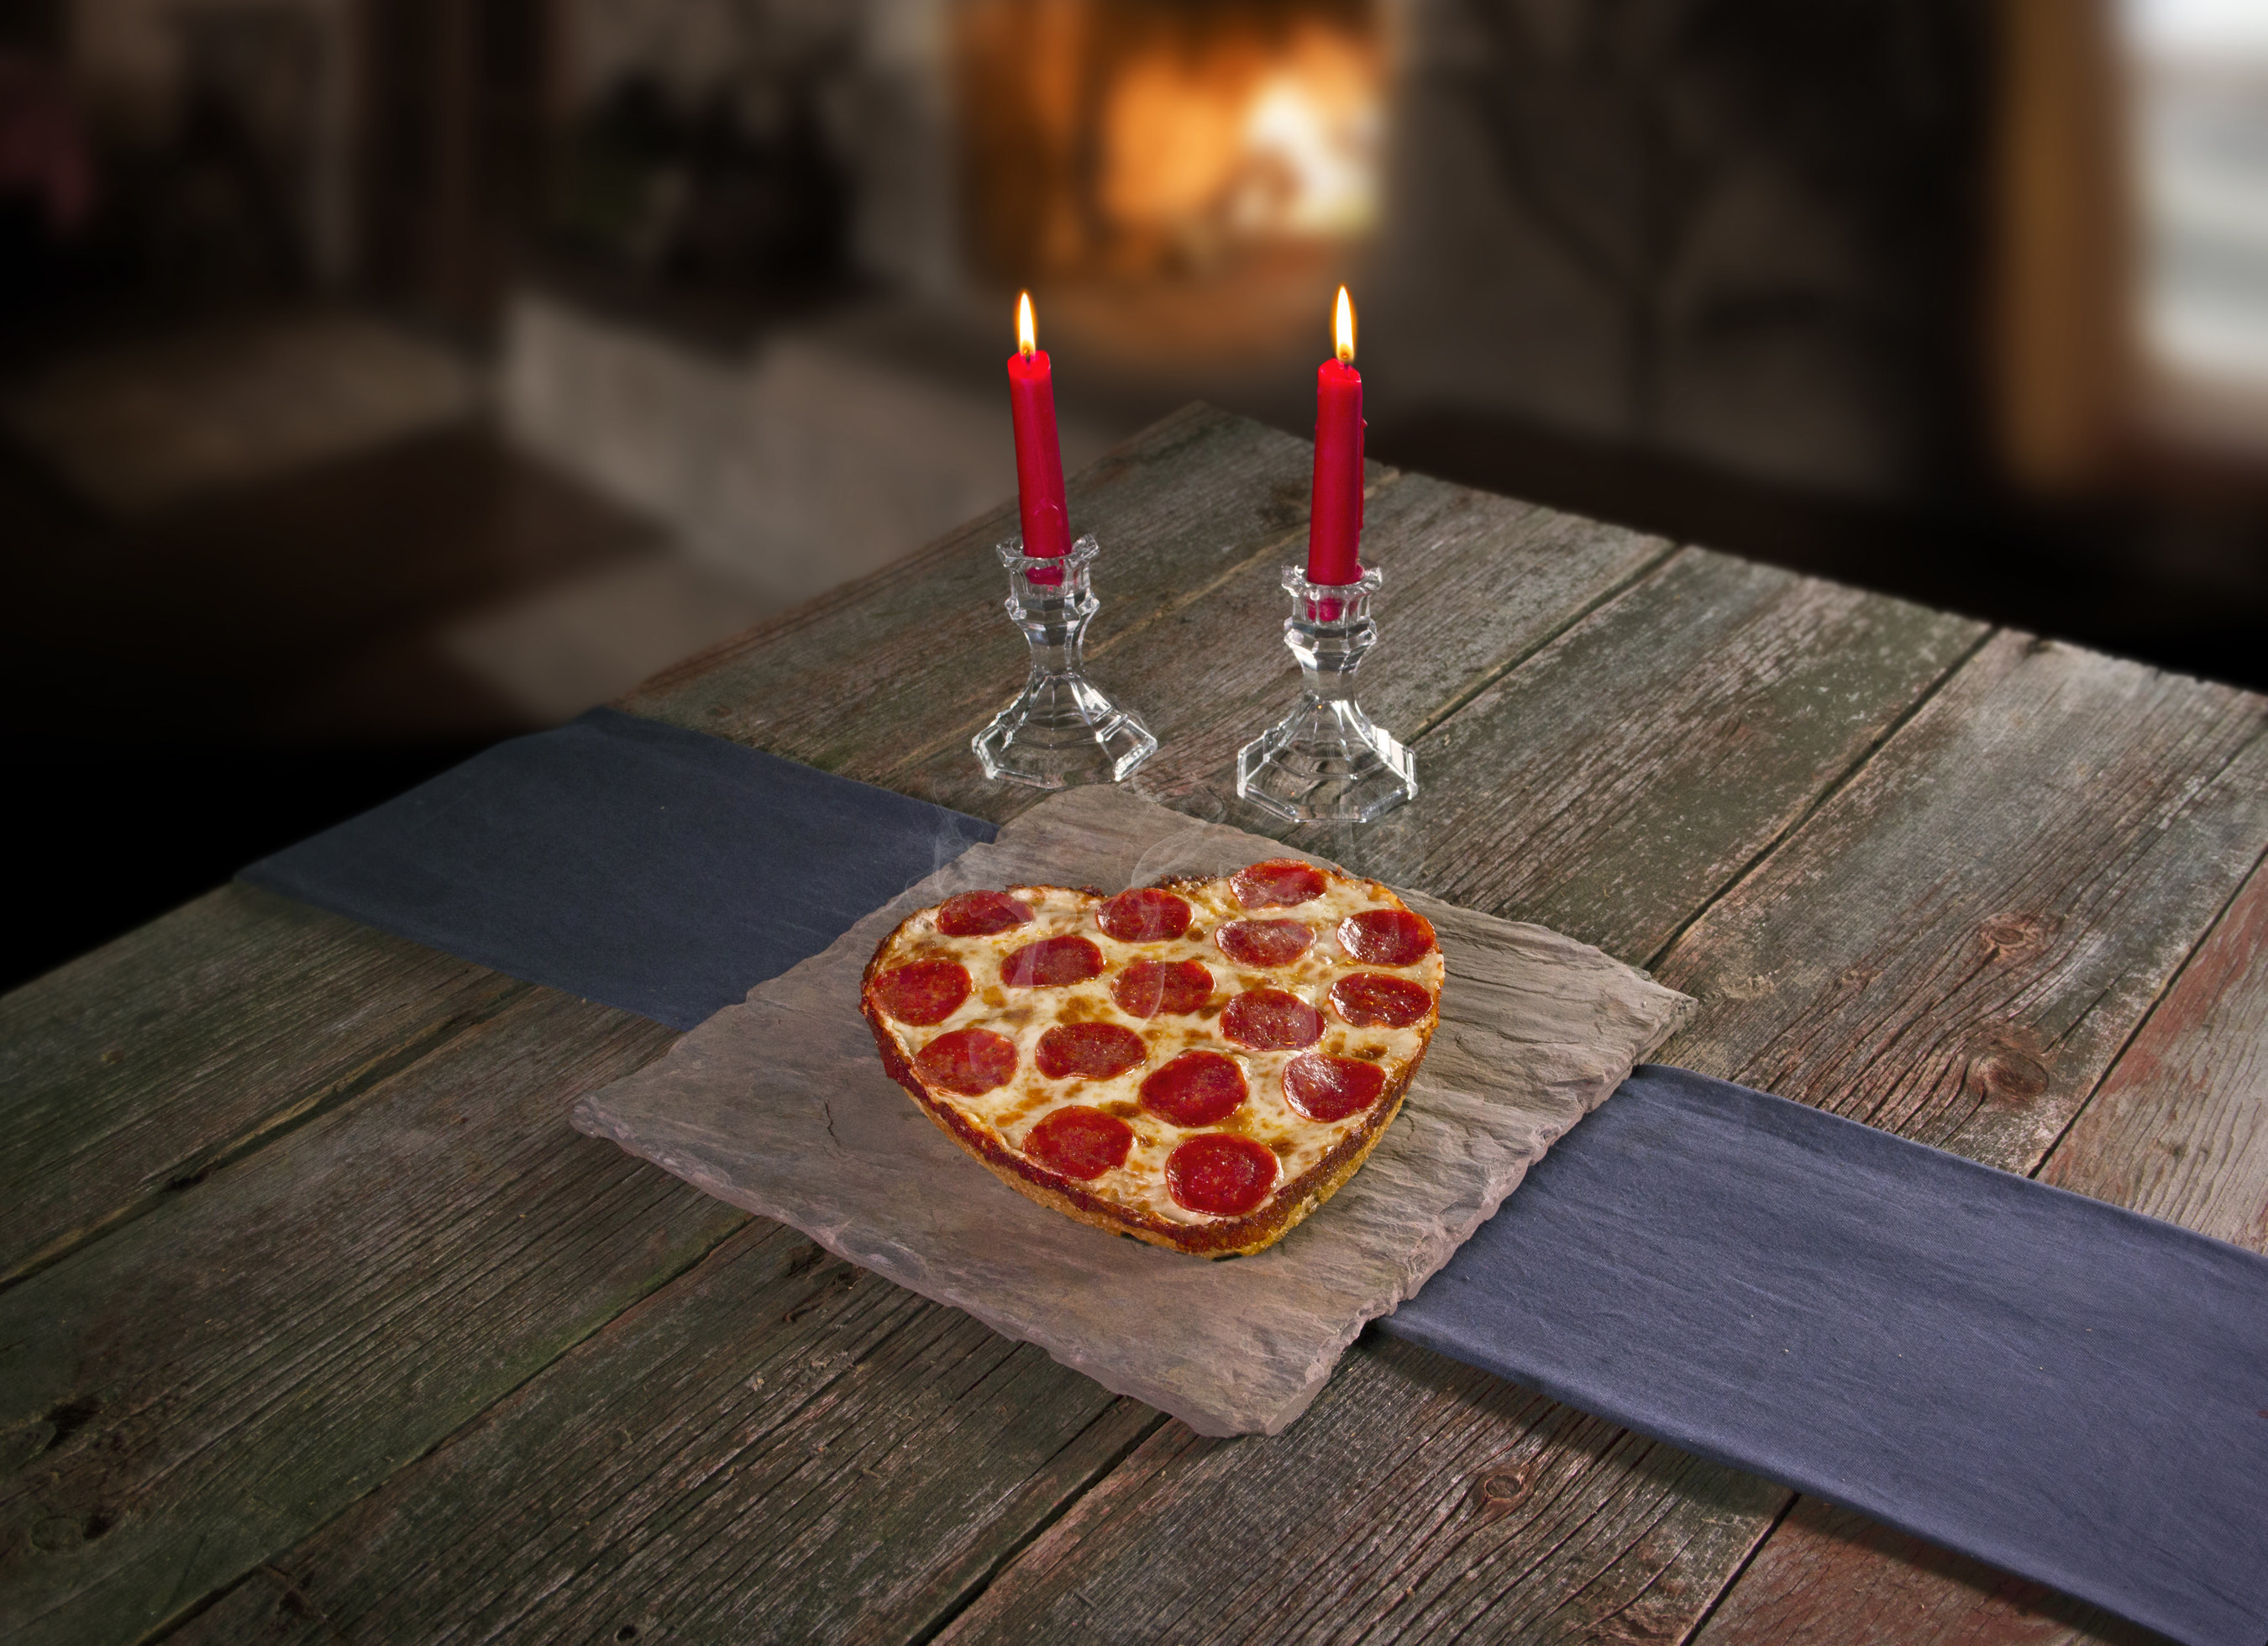 Michigan-based Jet's Pizza will offer heart-shaped pizzas Feb. 13-14, 2015 at participating stores nationwide.